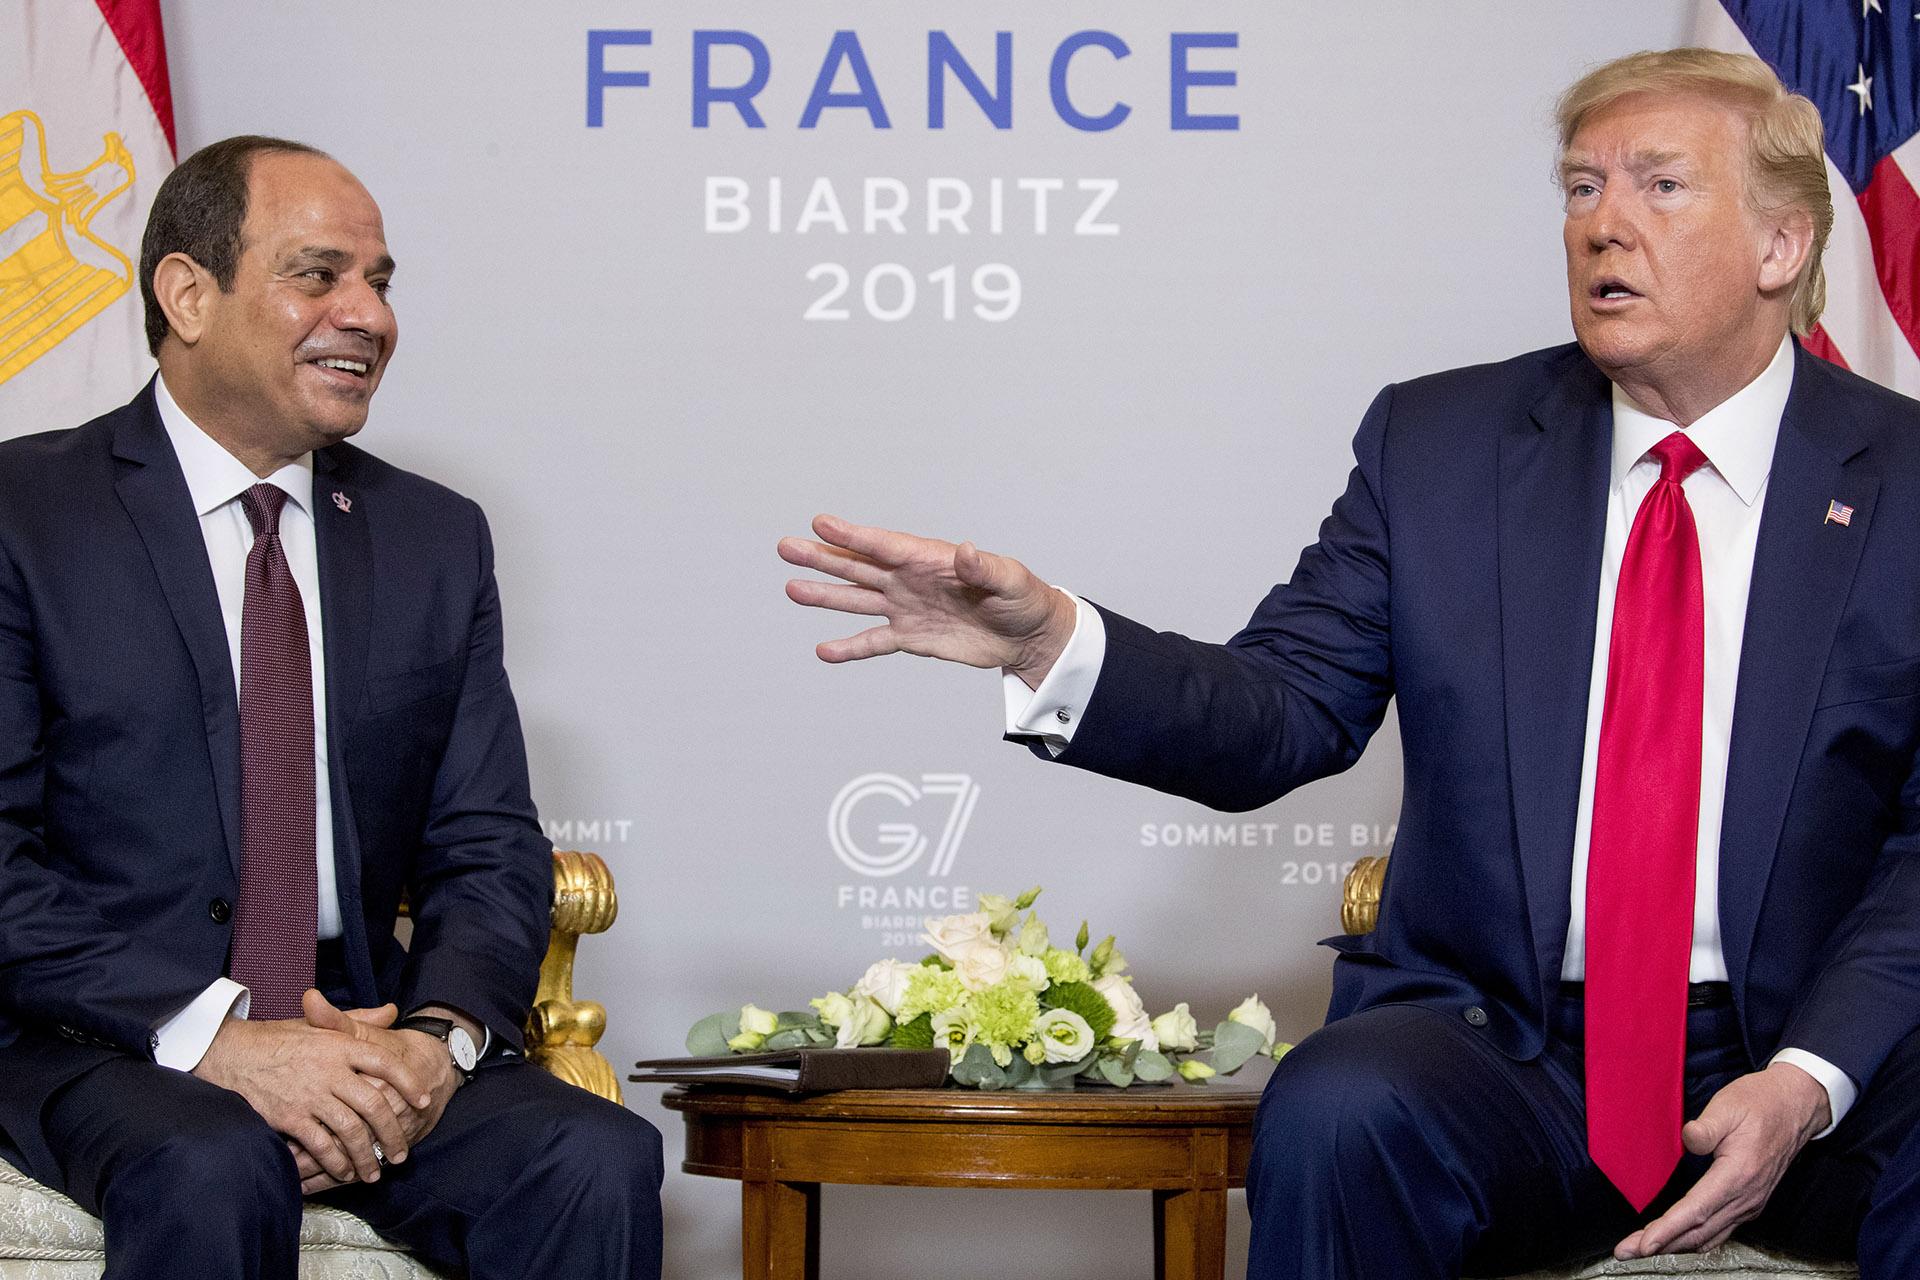 President Donald Trump, right, speaks during a bilateral meeting with Egyptian President Abdel Fattah al-Sissi, left, at the G-7 summit in Biarritz, France, Monday, Aug. 26, 2019. (AP Photo / Andrew Harnik)